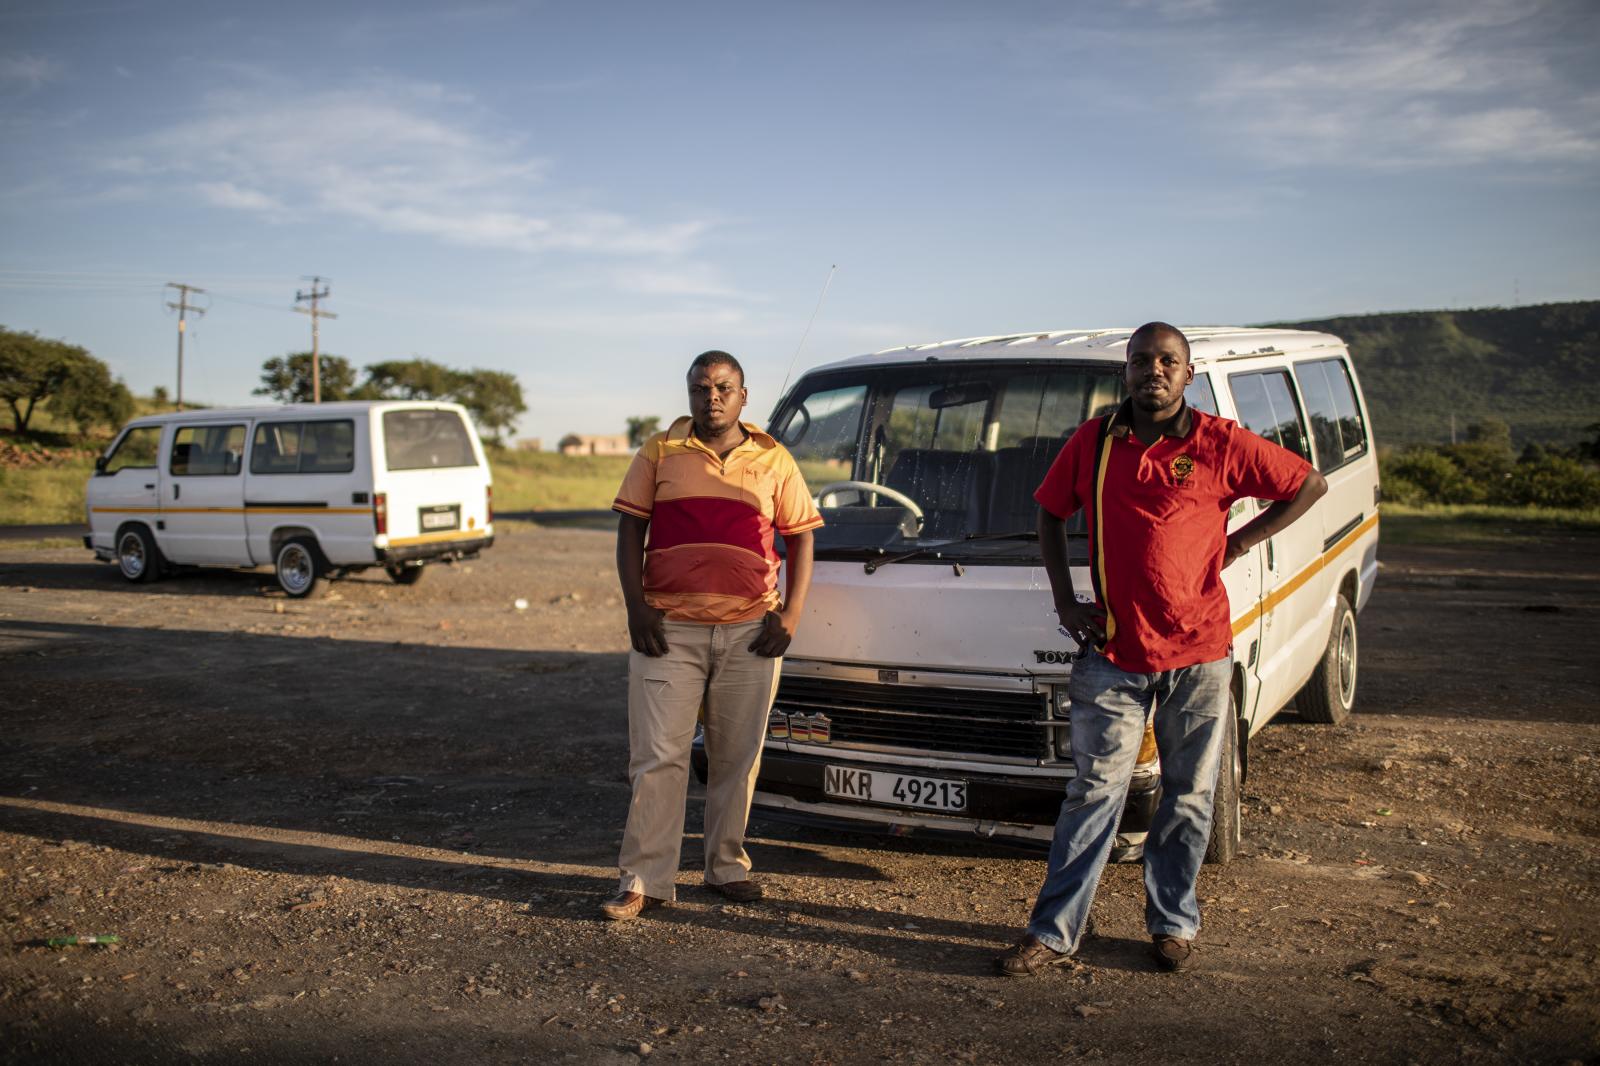 16 February 2020: Taxi drivers ...them proud to be from the town.